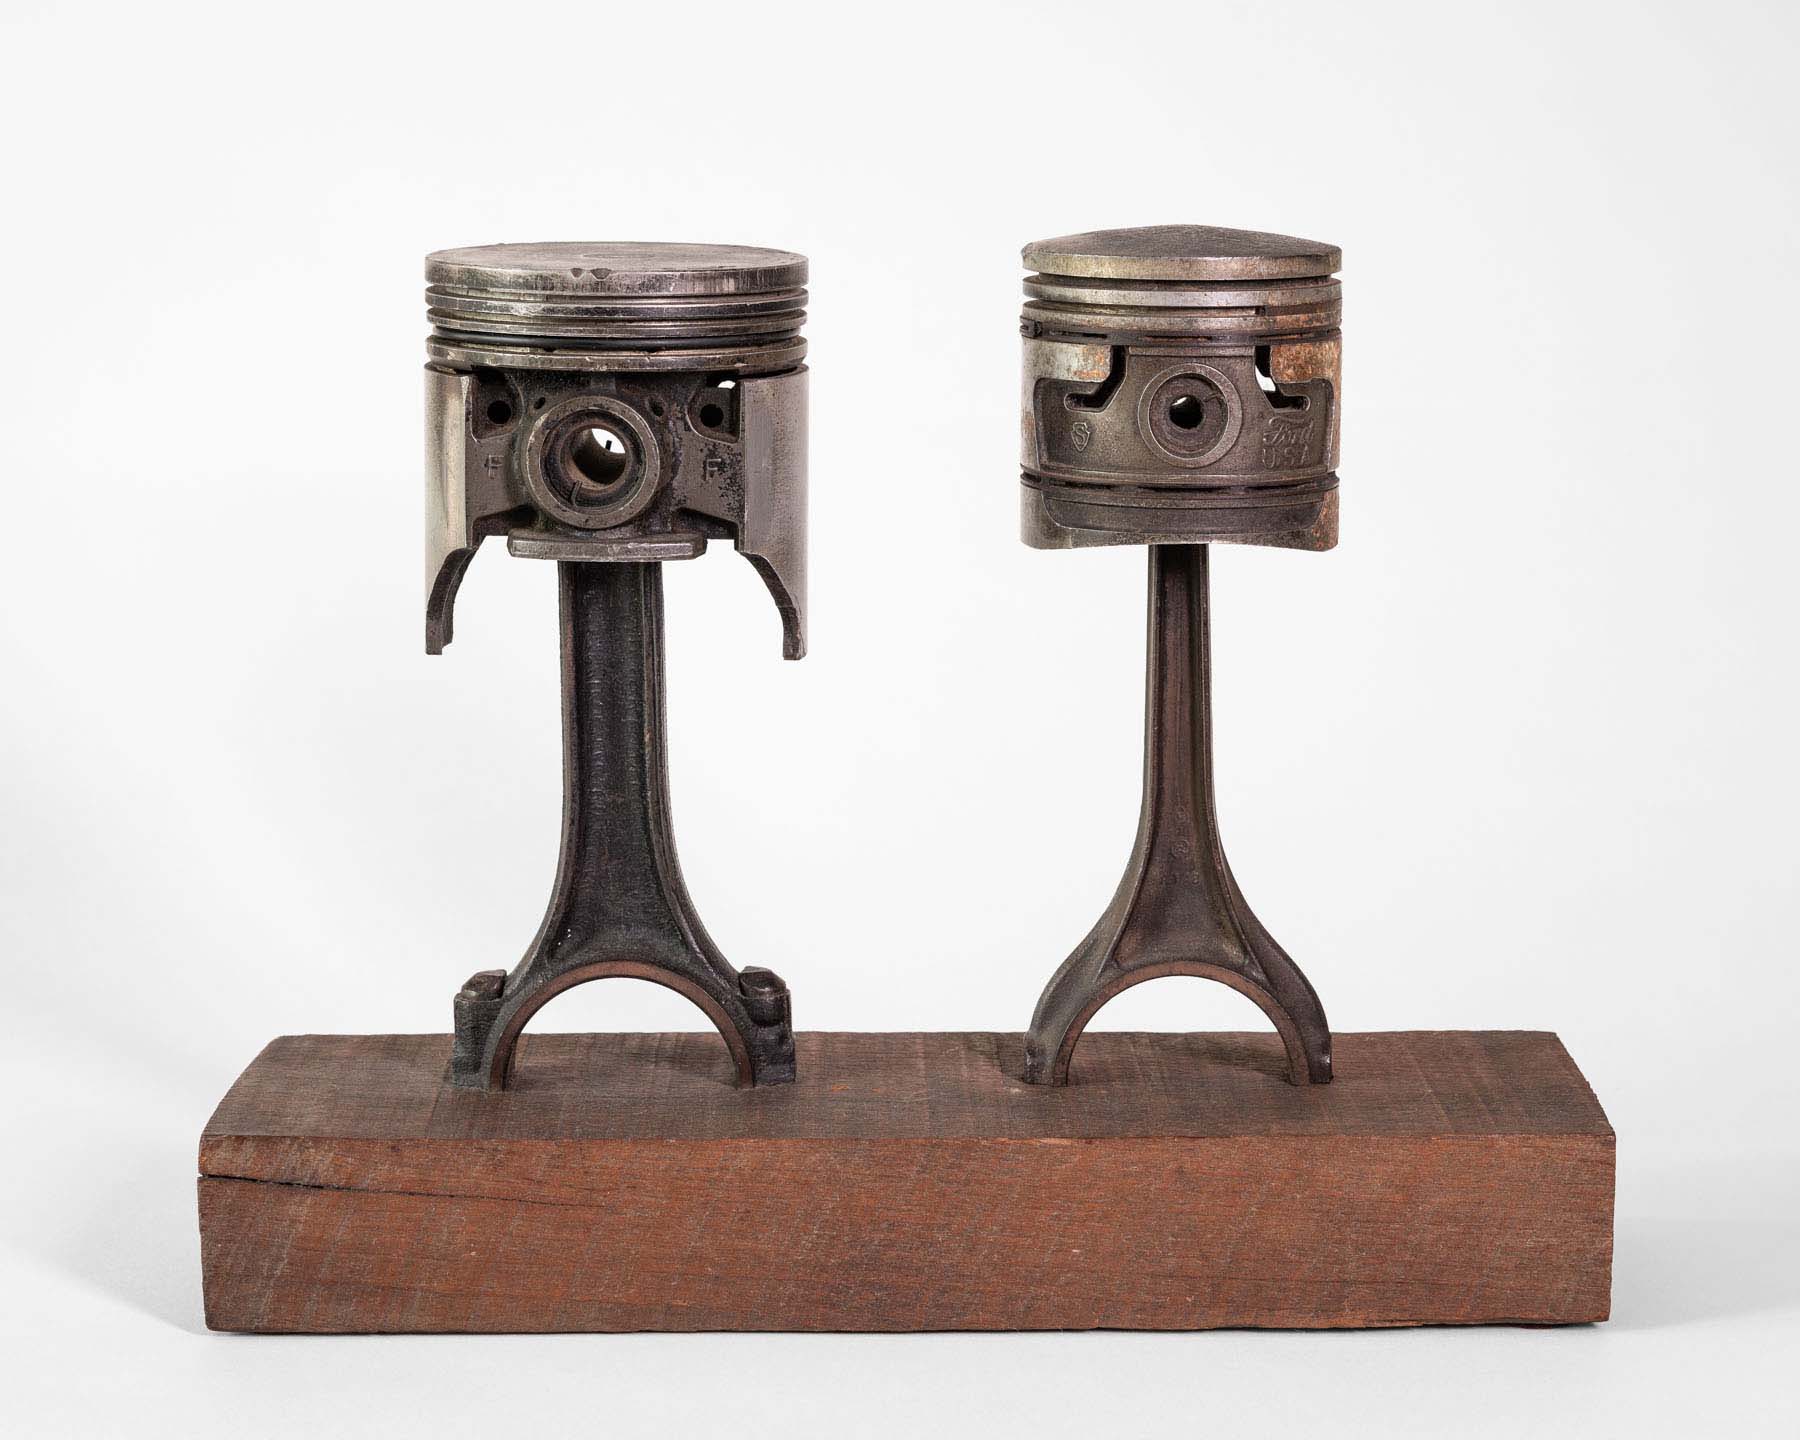 Two pieces of forked steel mounted on a wood block with a round metal piece on the top of each.